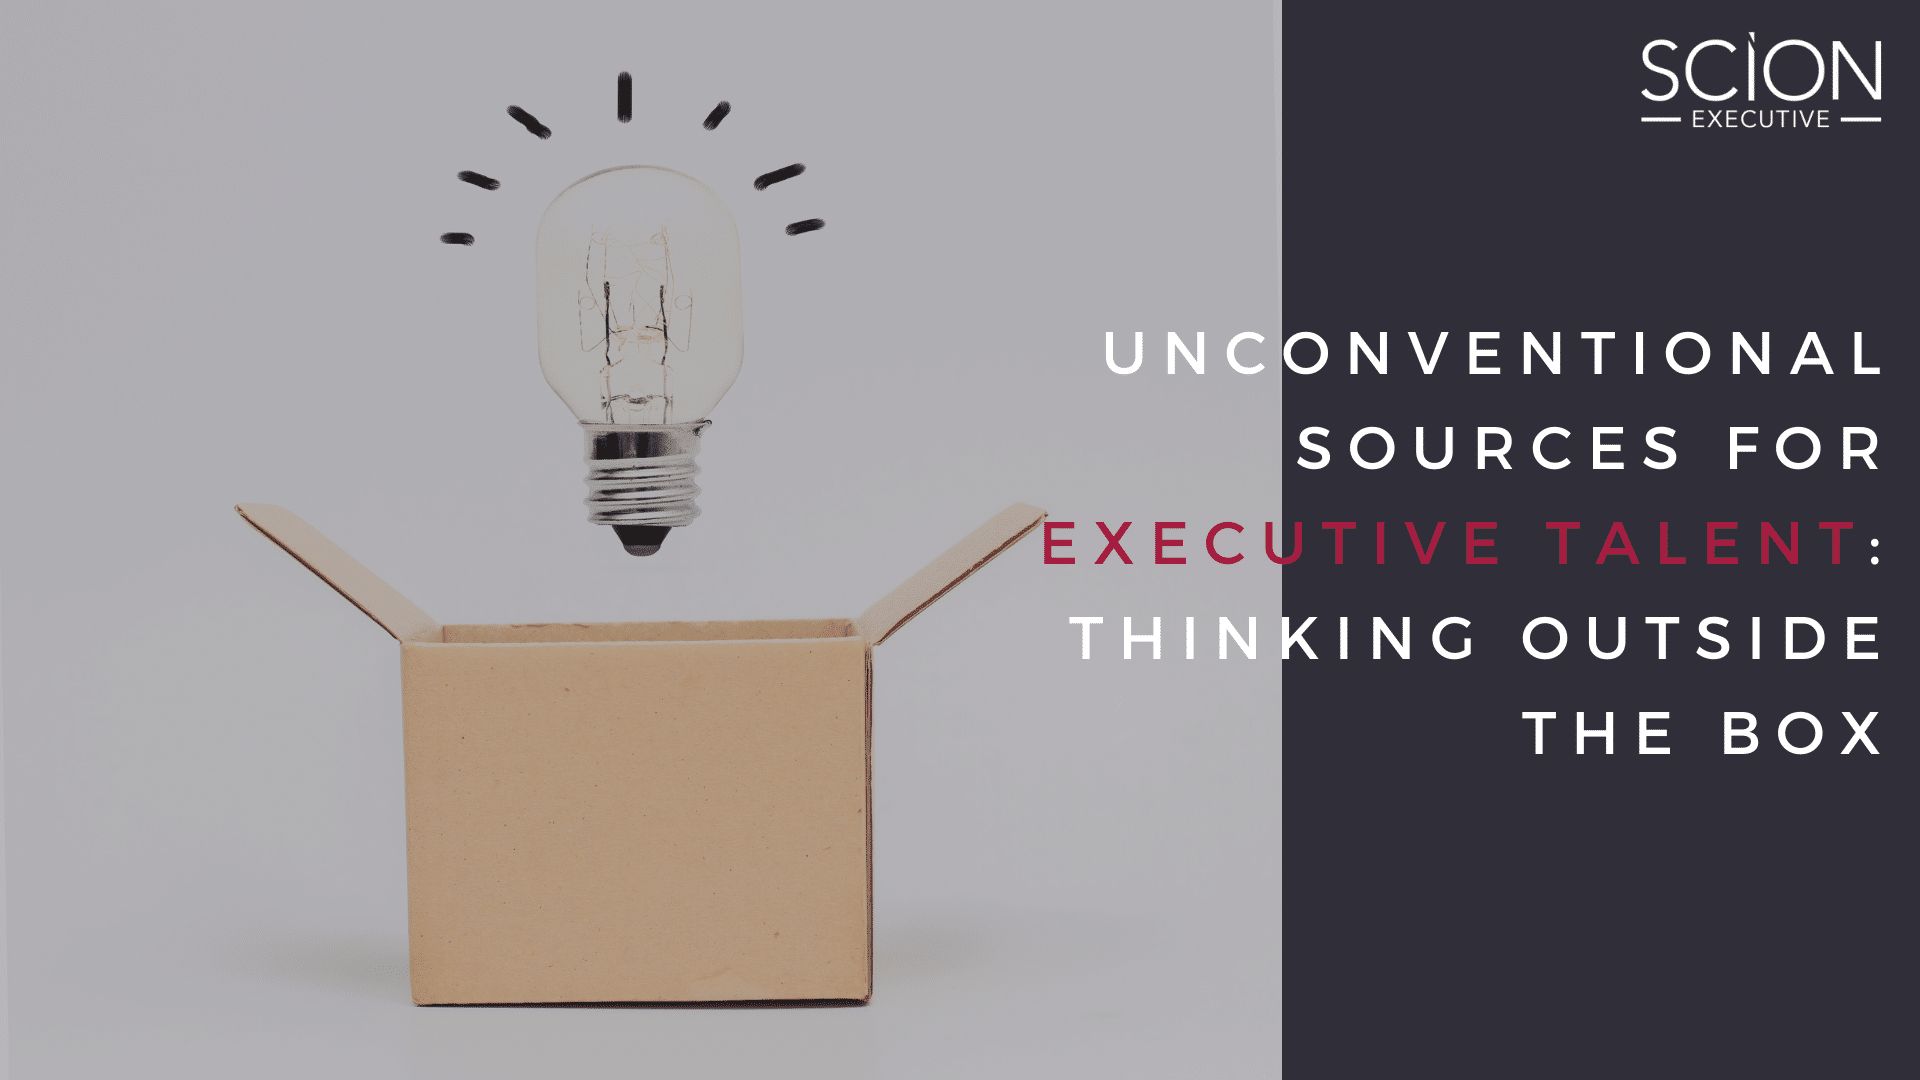 Unconventional Sources for Executive Talent Thinking Outside the Box